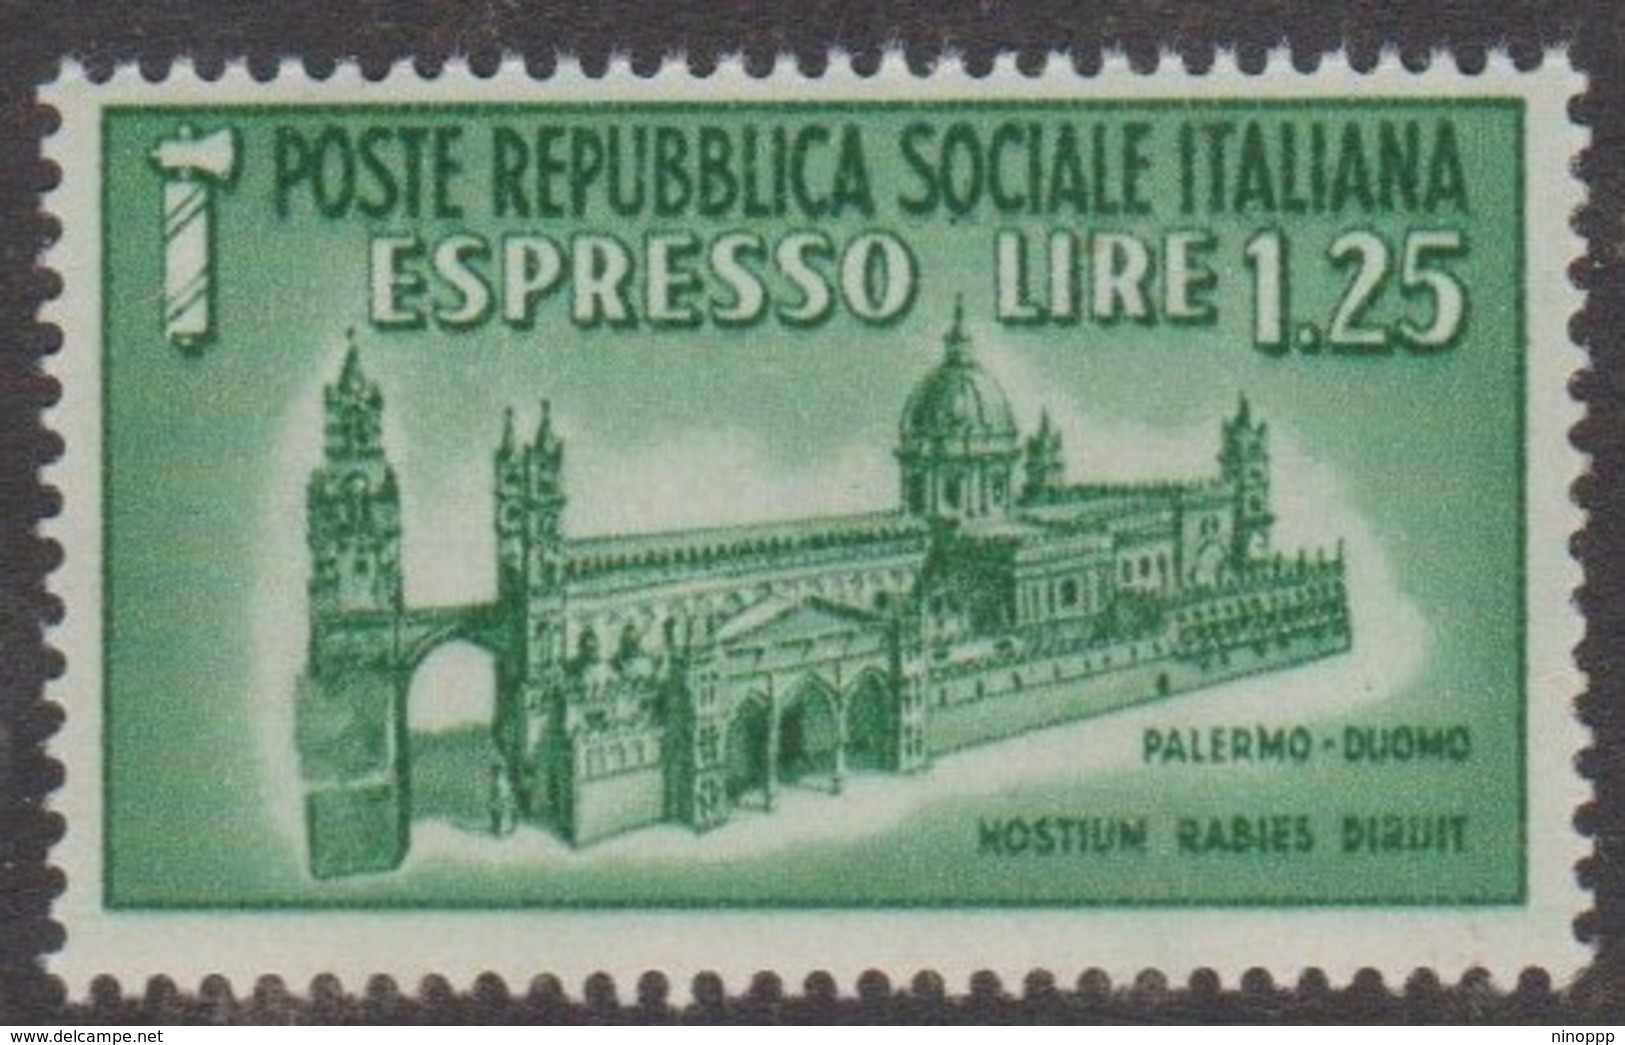 Italy Repubblica Sociale Italiana E 10 1944 Special Delivery Lire 1.25 Green Palerme Dome, Mint Never Hinged, - Poste Exprèsse